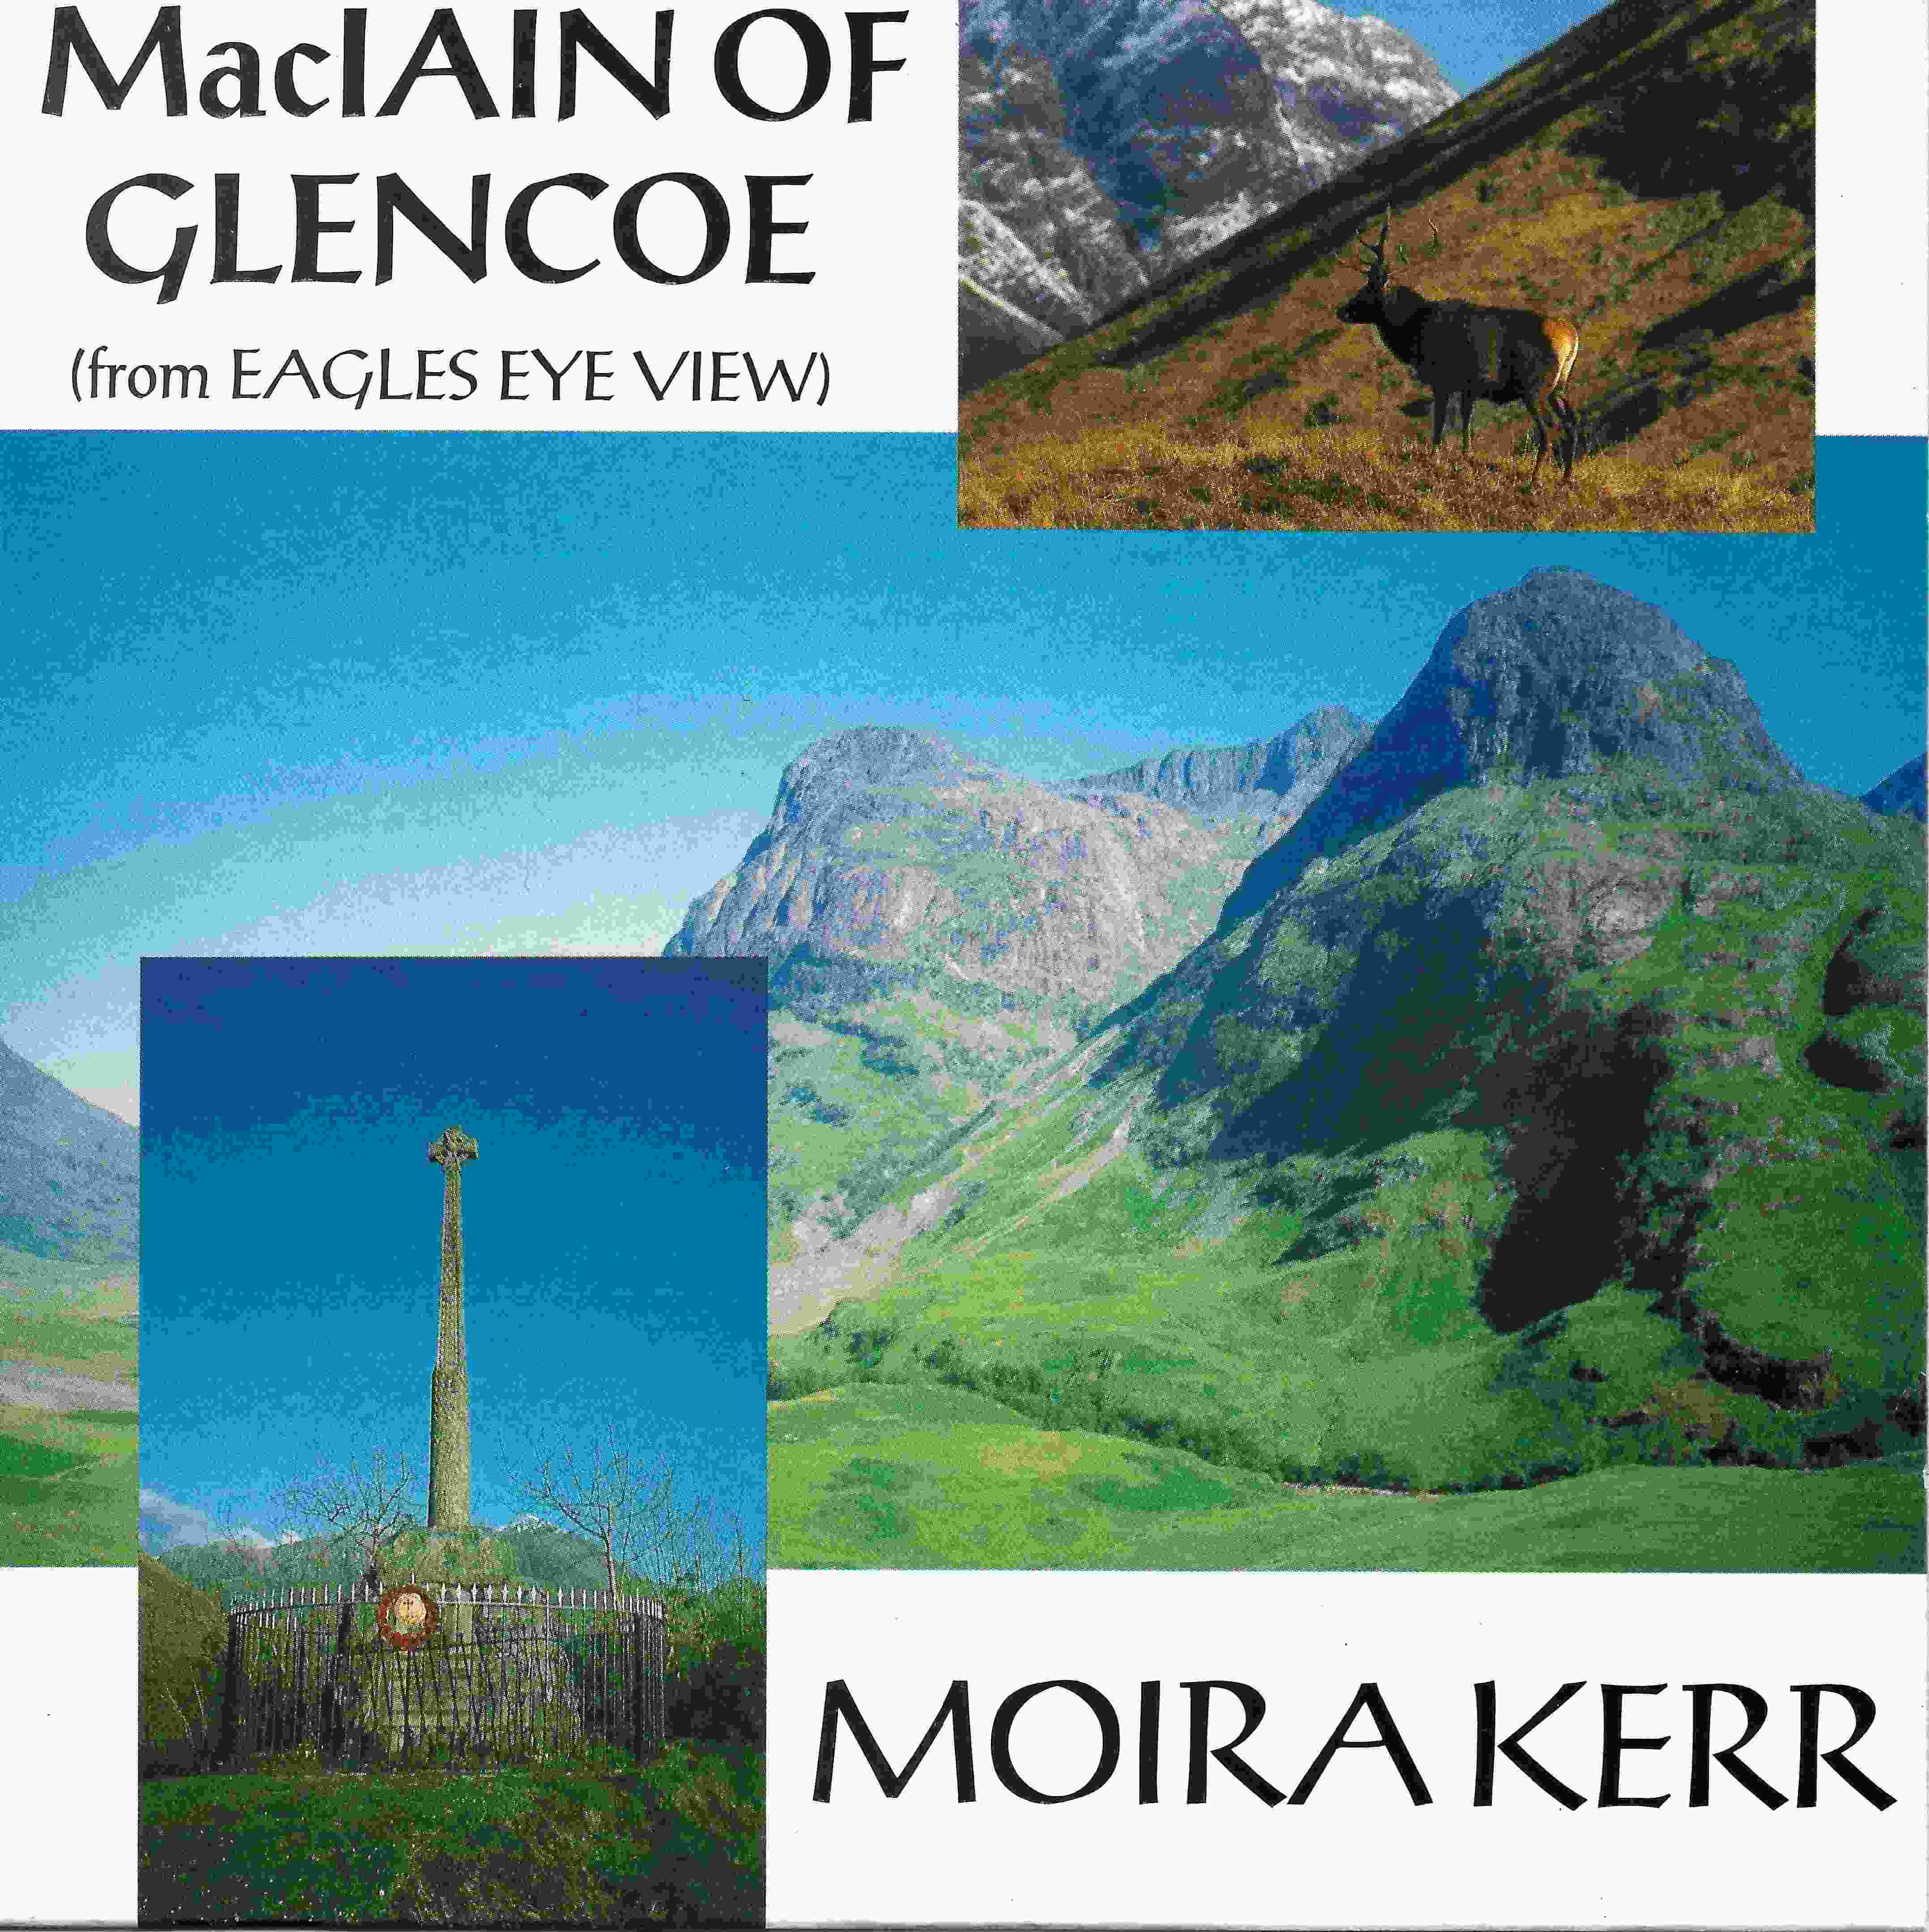 Picture of MacIain of Glencoe (Eagles eye view) by artist Moira Kerr from the BBC singles - Records and Tapes library